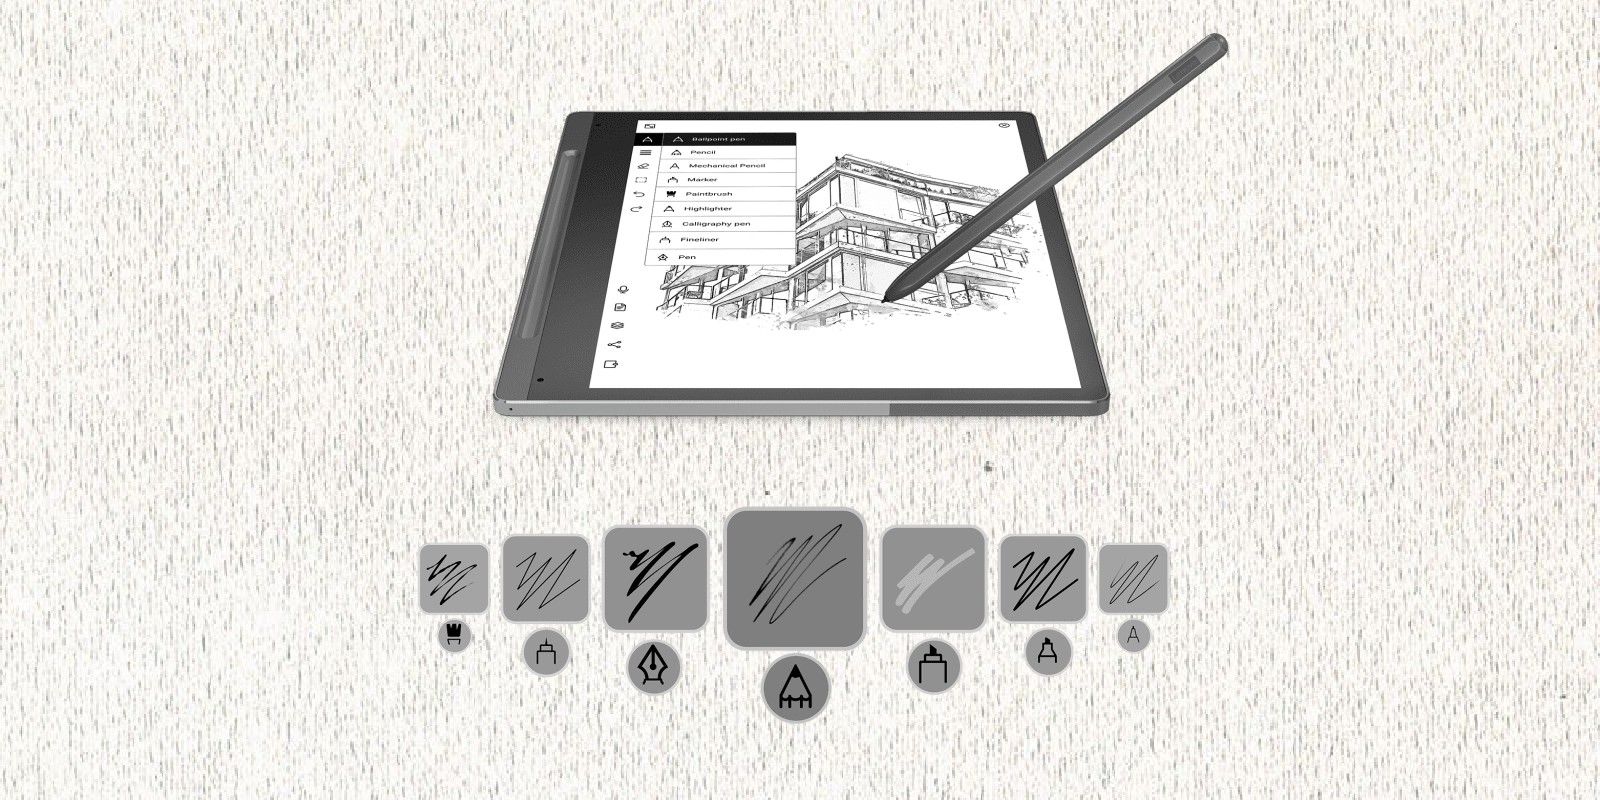 A picture showing the Lenovo Smart Paper and multiple pen tools